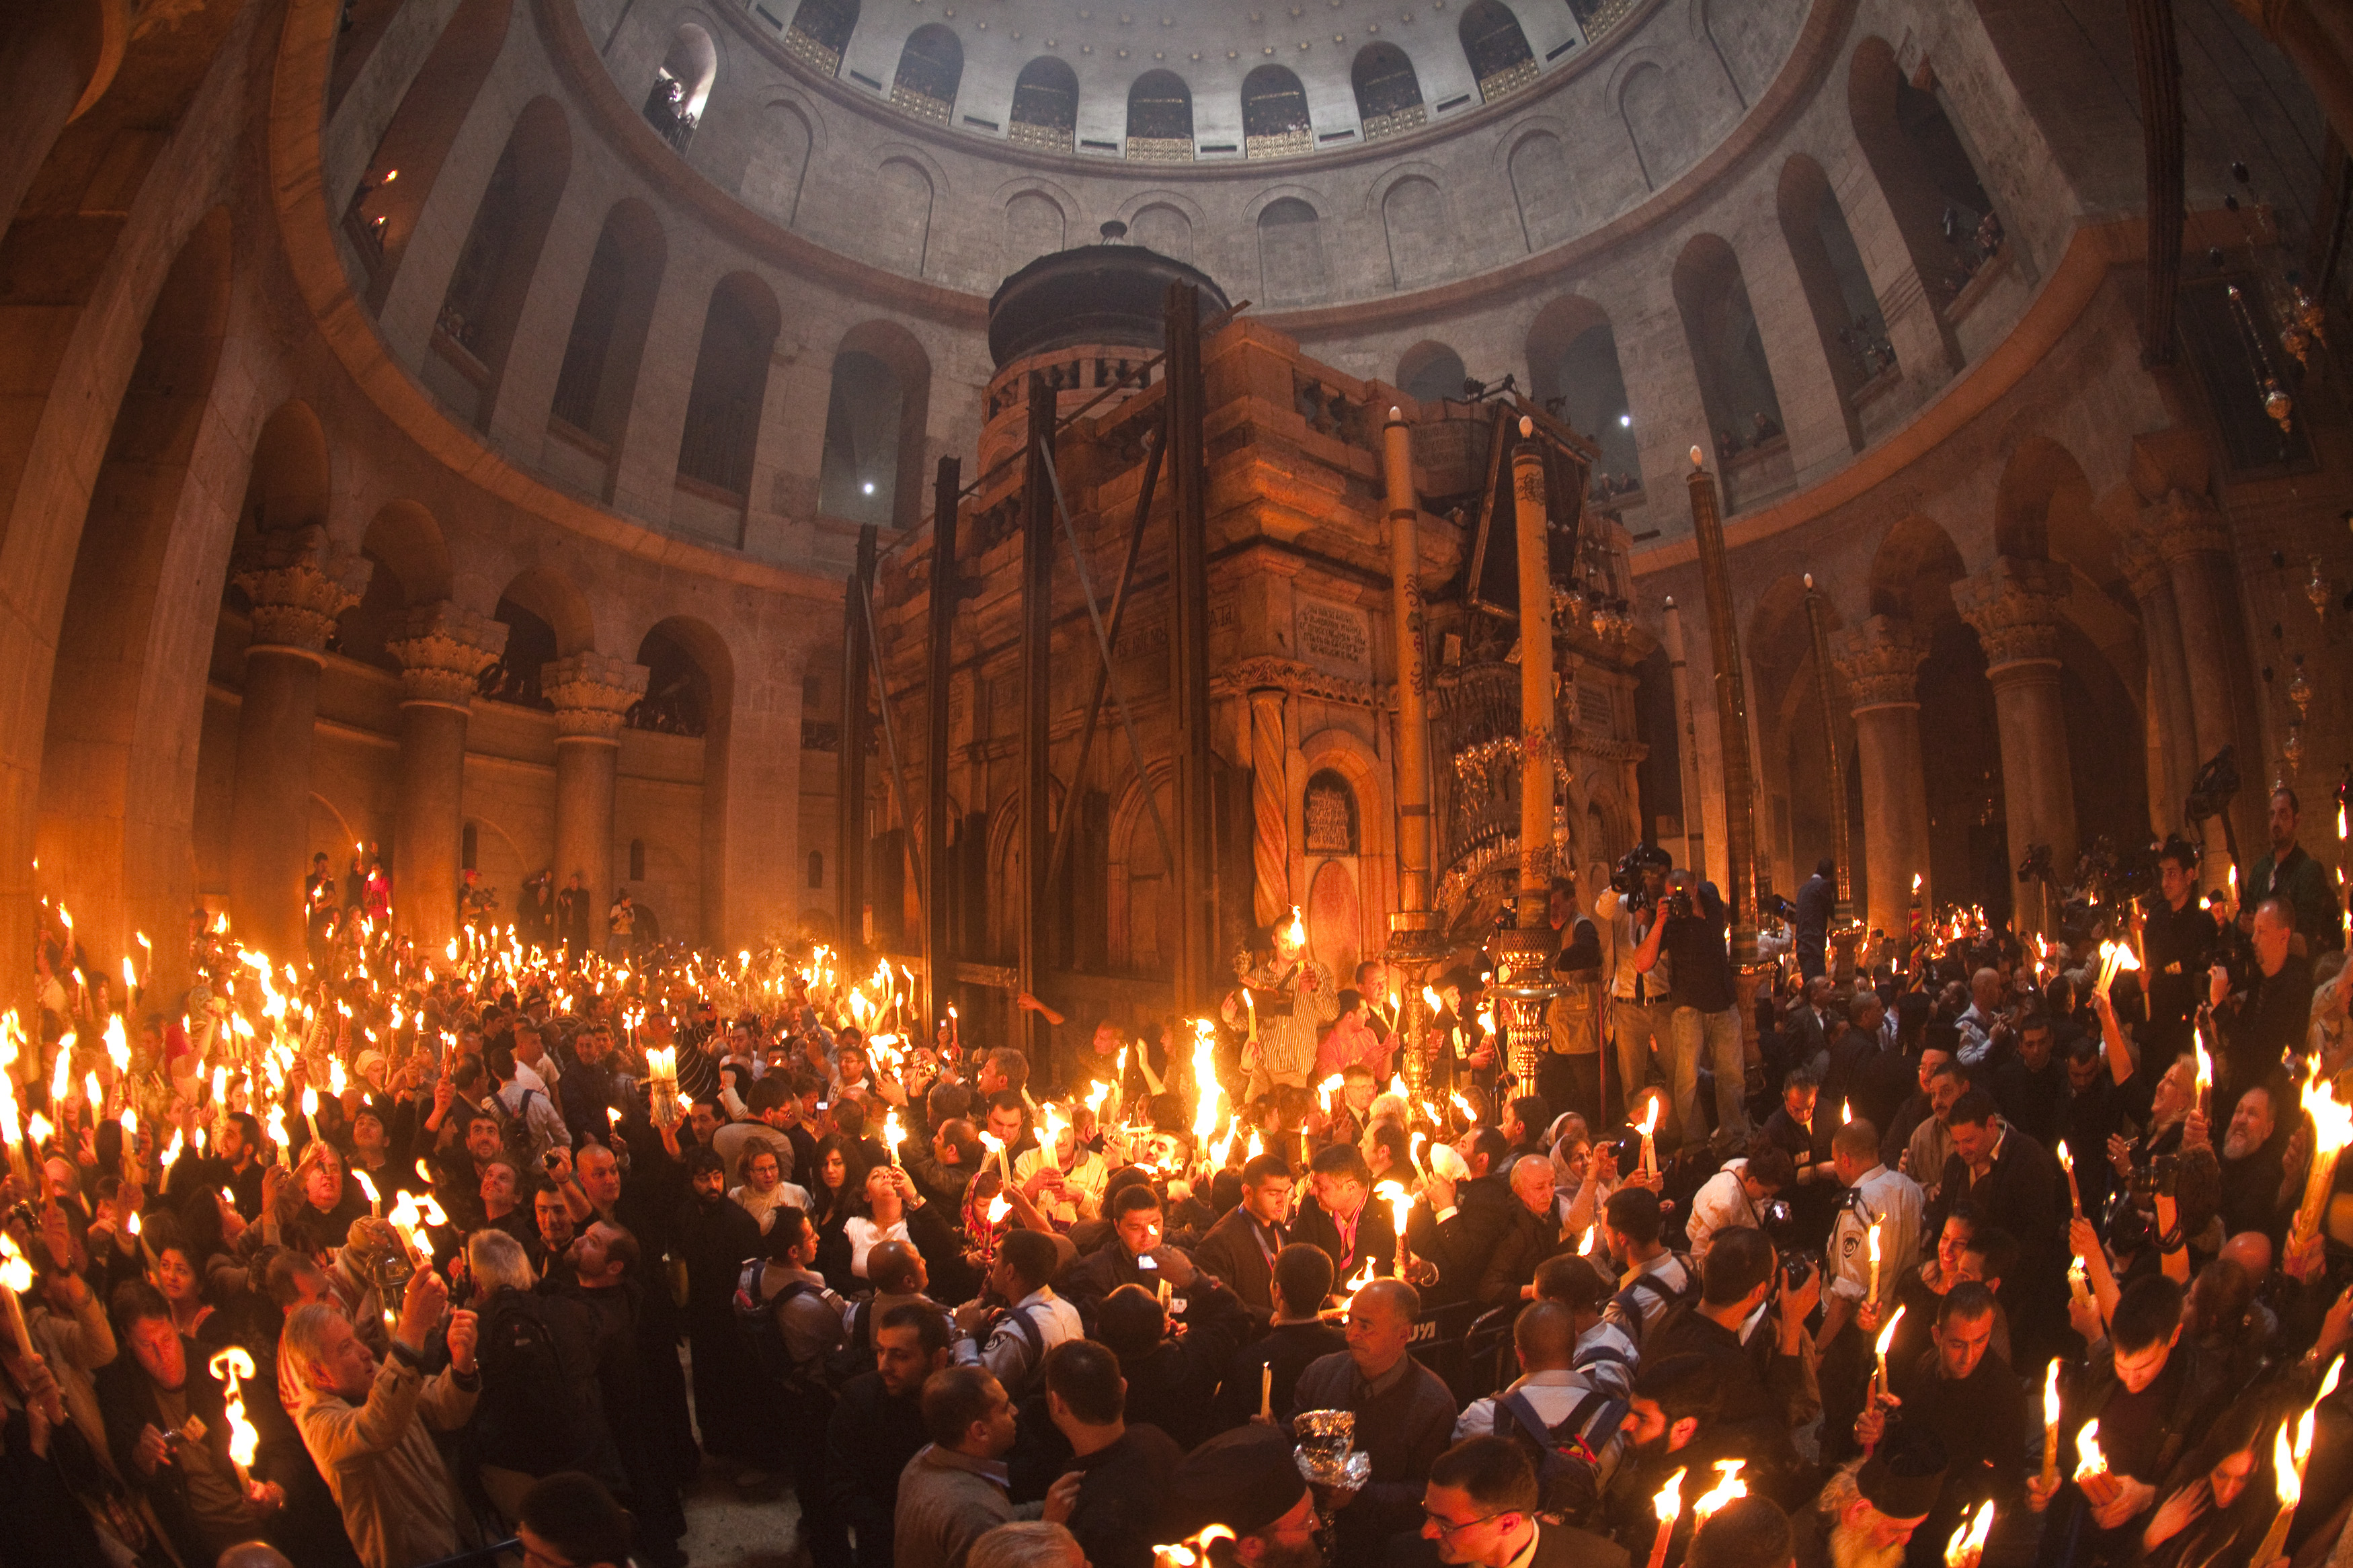 A general view of the Church of Holy Sepulchre during Christian Orthodox Holy Fire ceremony in Jerusalem's Old City